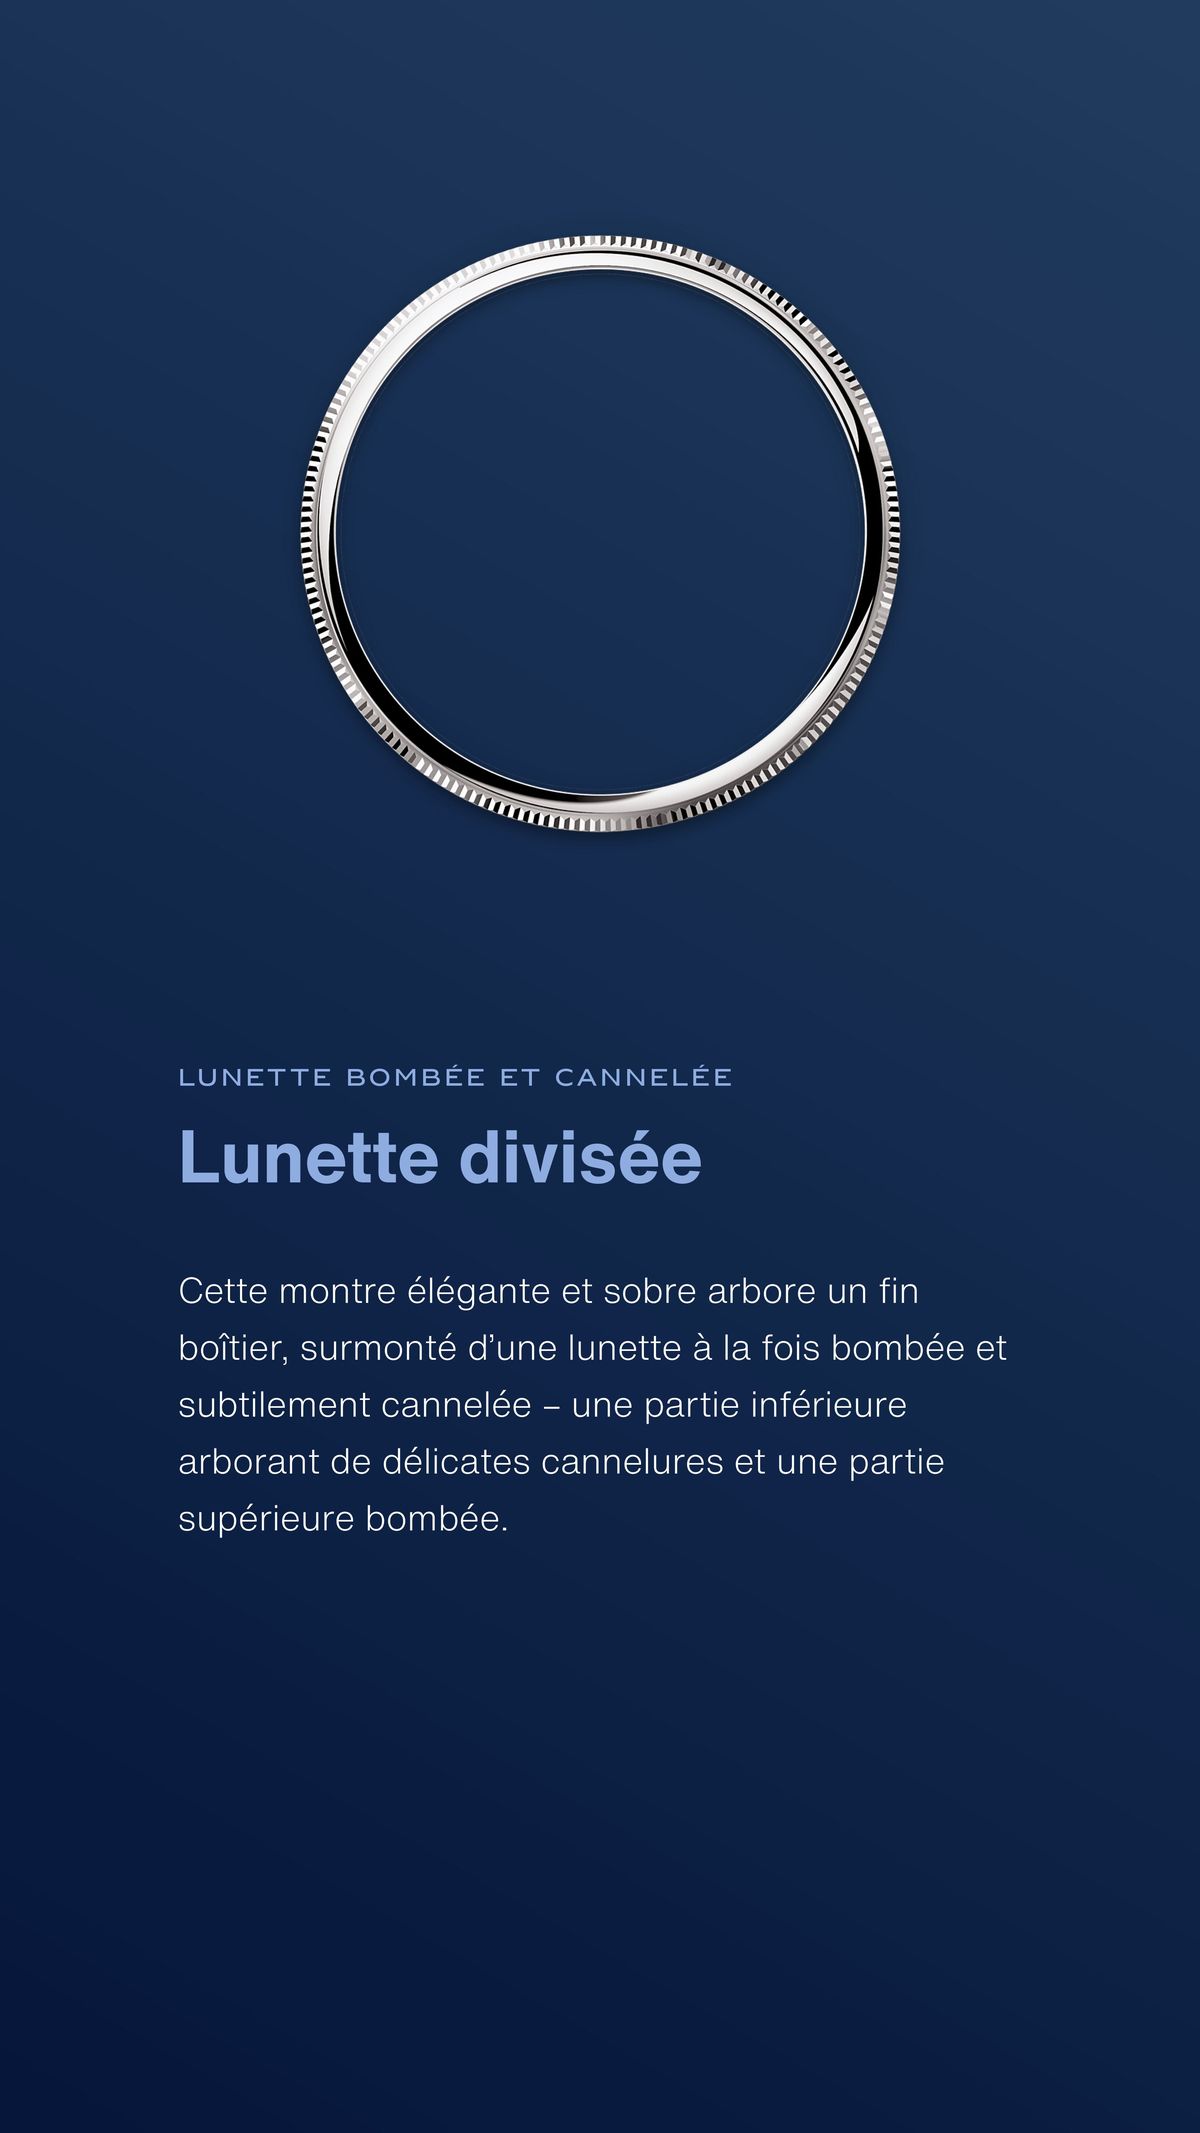 Catalogue 39 mm, platine, finition polie, page 00005